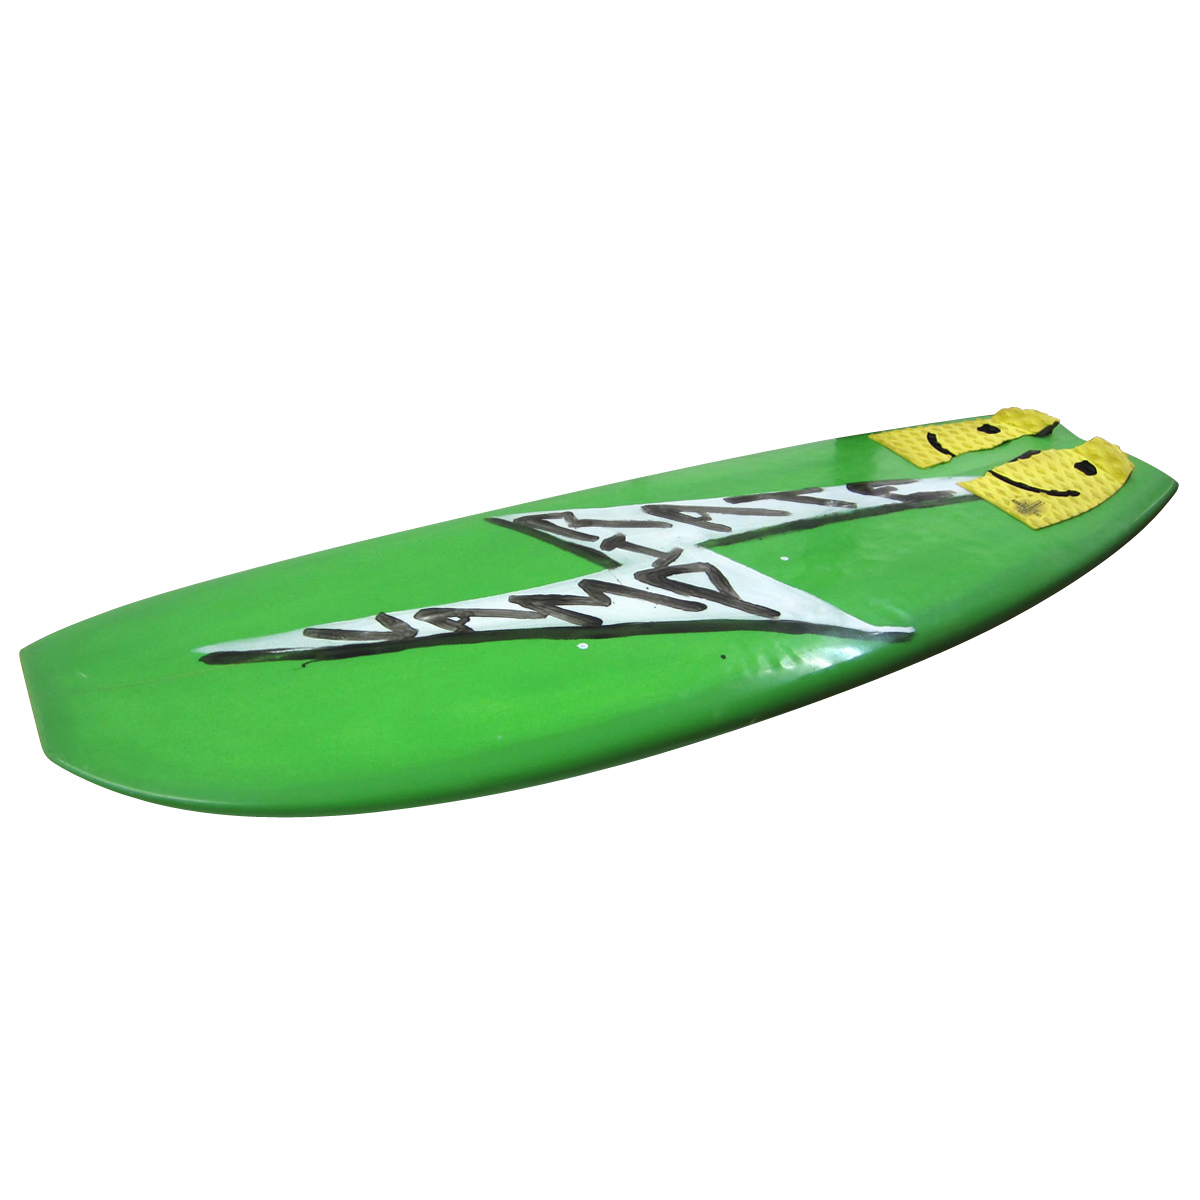 Vampirate Surfboards / GRAVE DIGGER 5`2 EVIL TWIN